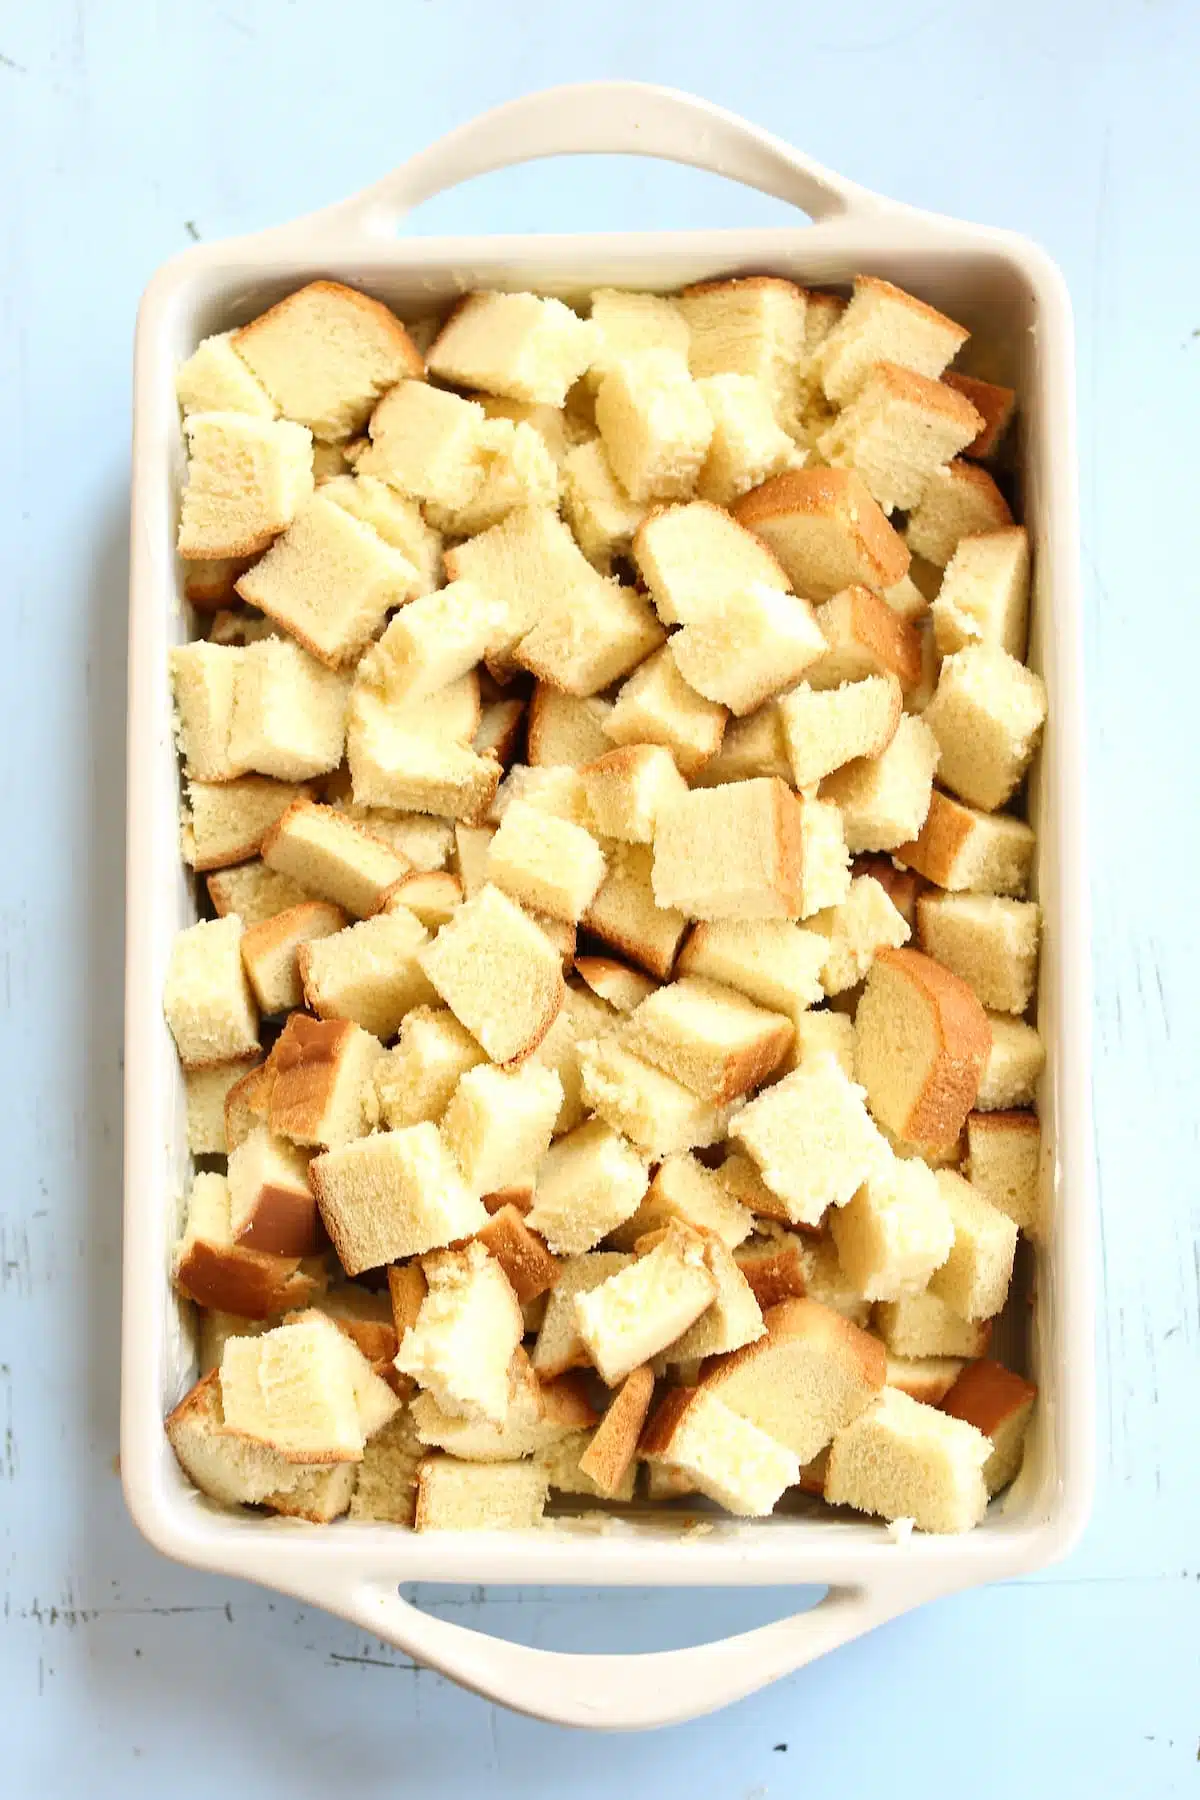 a casserole dish of brioche that is cubed.